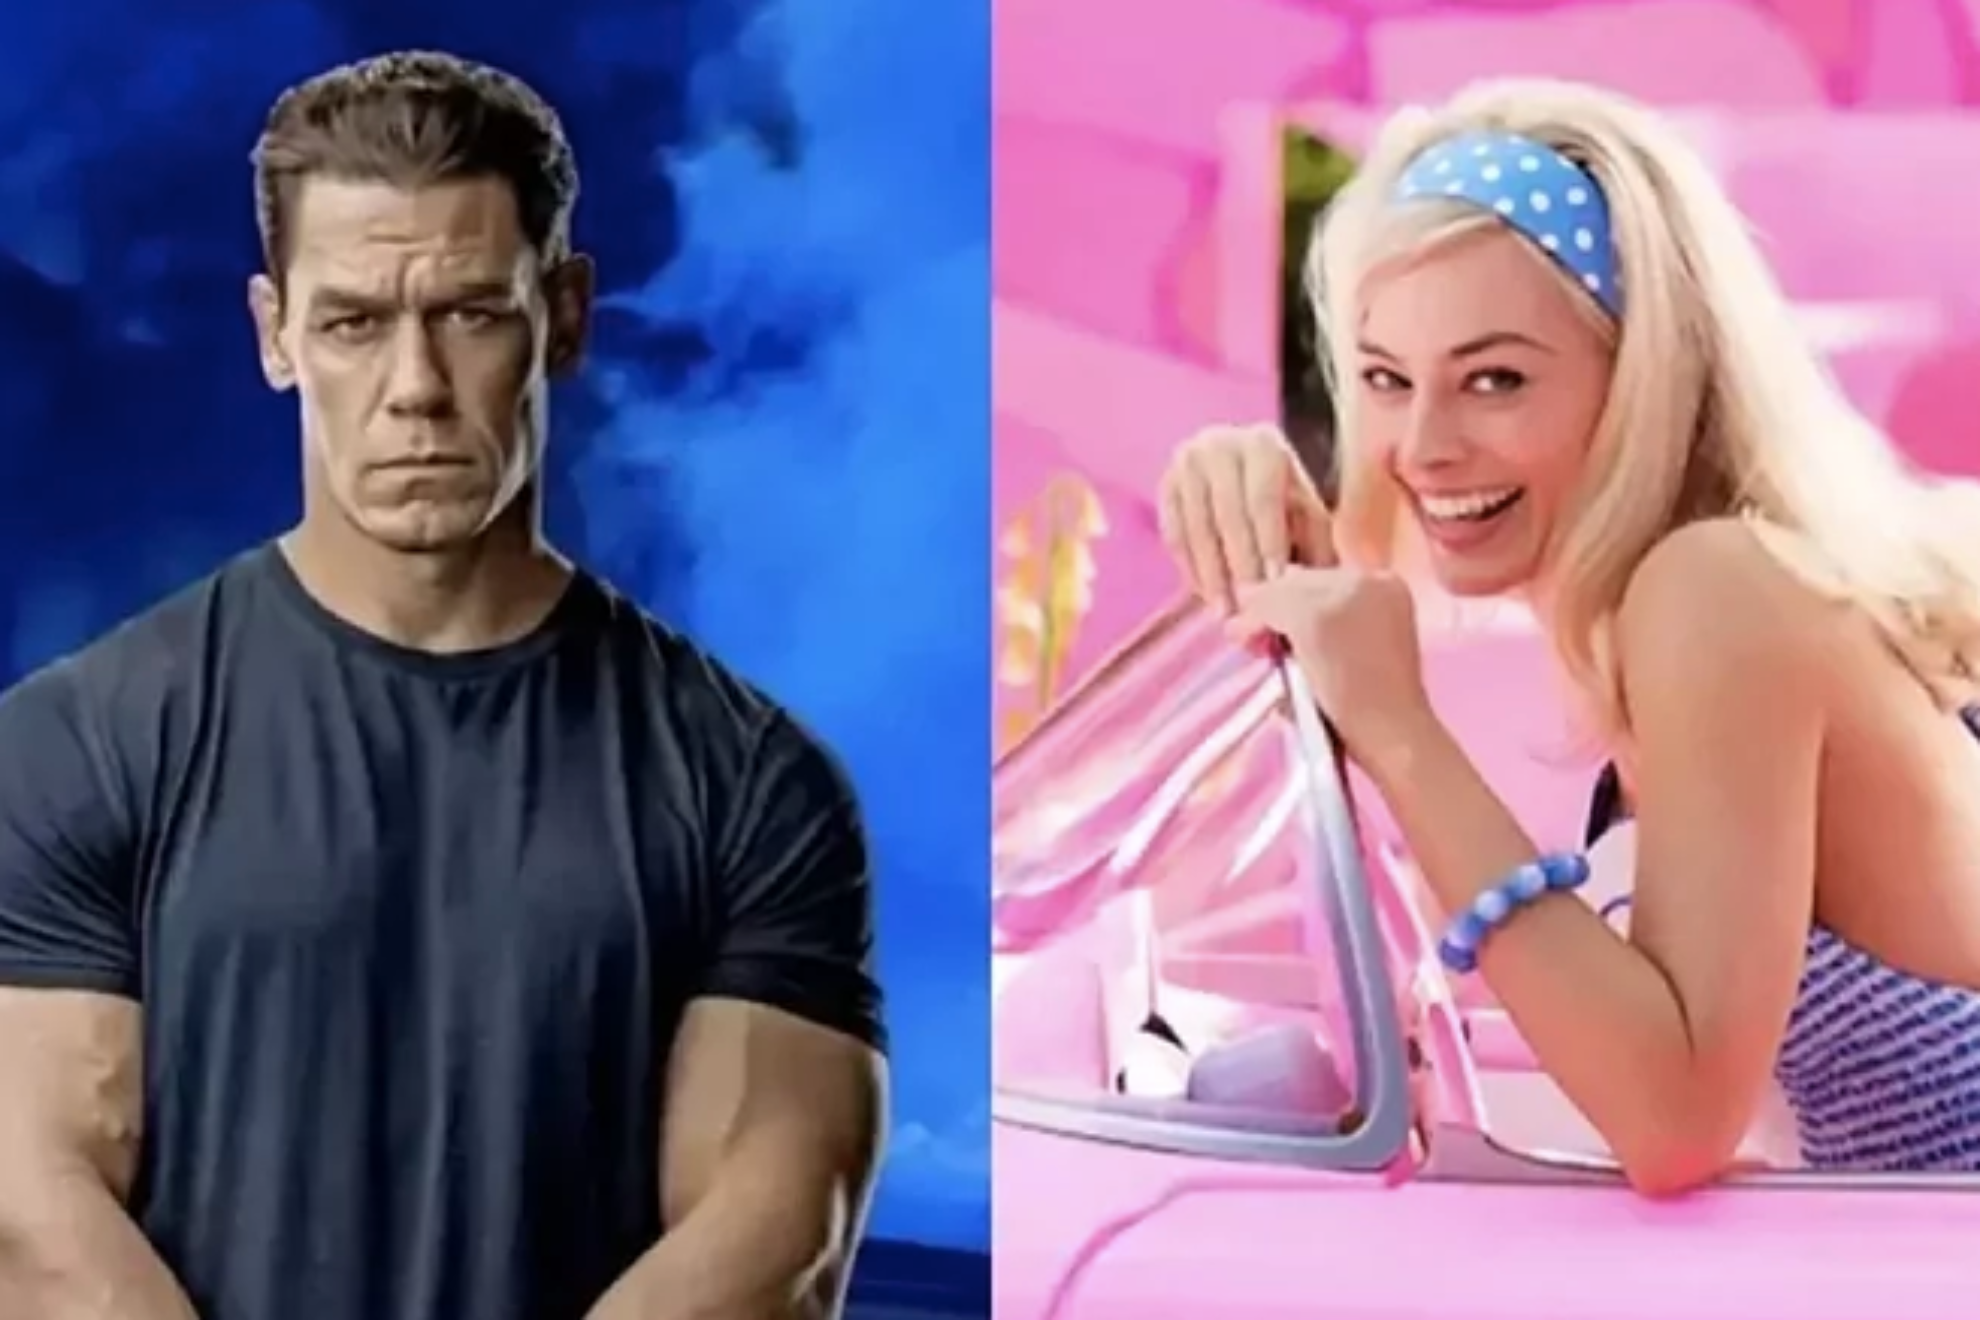 Why is John Cena being transformed into Ken for the Barbie movie?